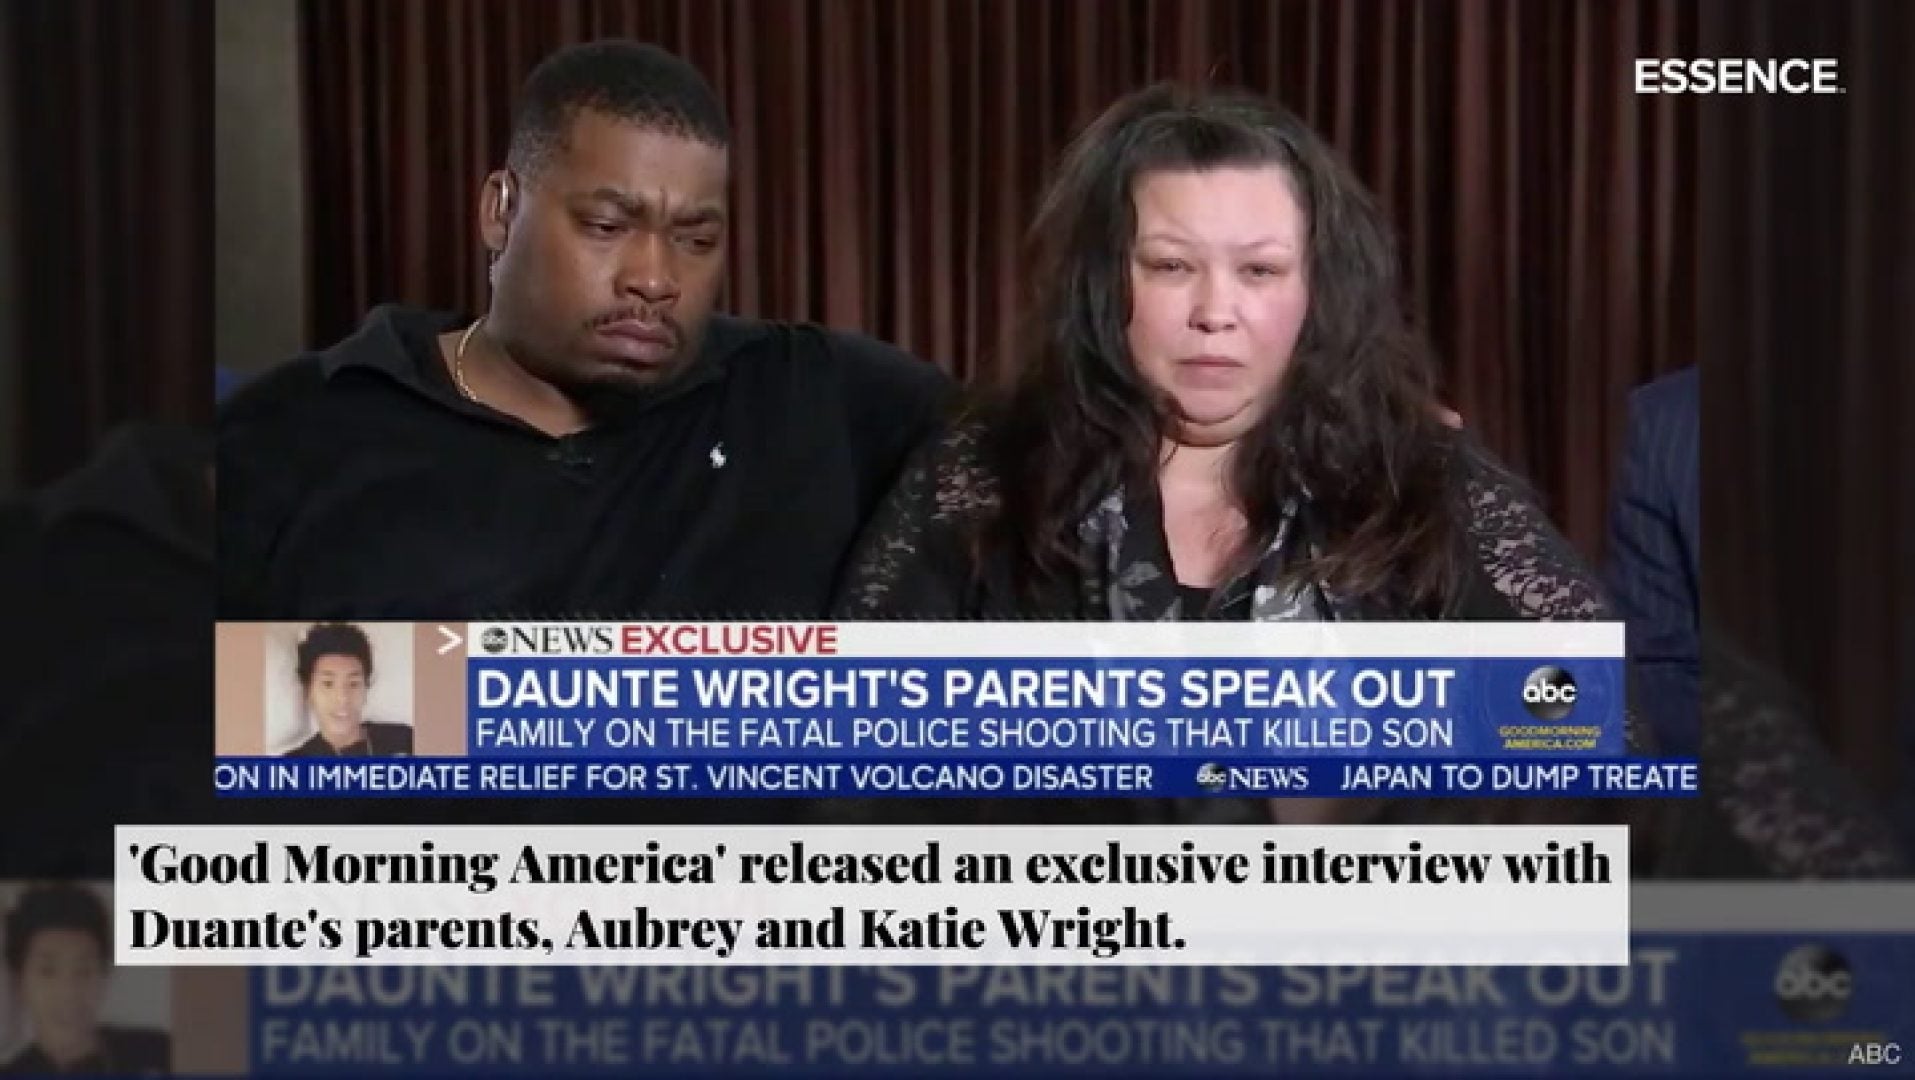 What To Know About Daunte Wright’s Fatal Traffic Stop